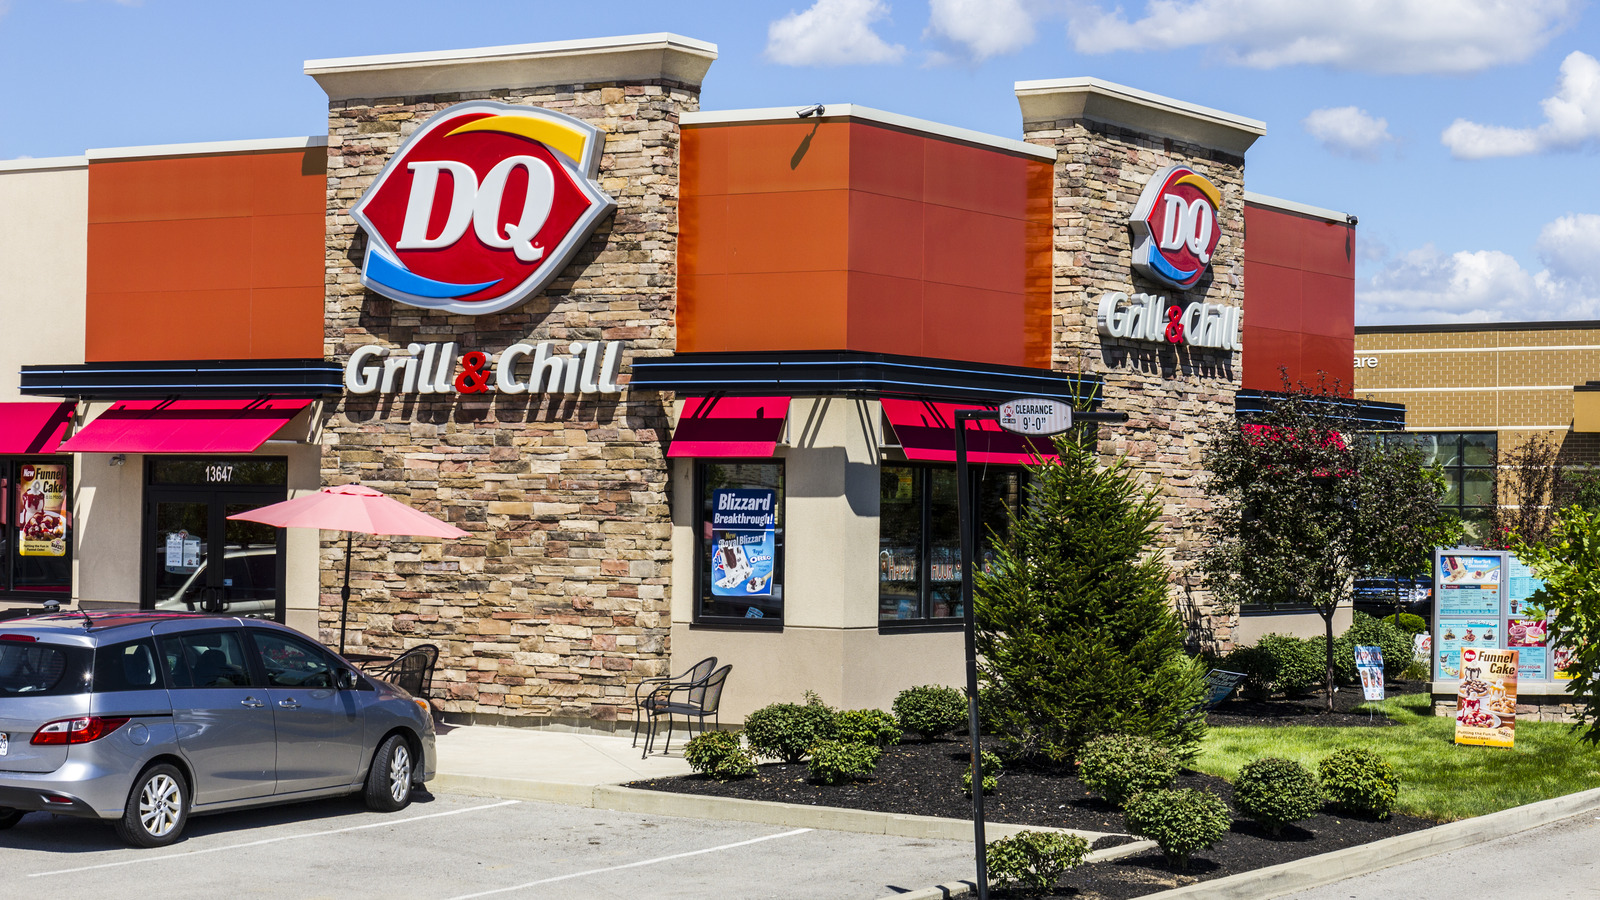 Dairy Queen Grill & Chill - Have you downloaded the DQ App? All the  season's hot deals are loaded up for you! 🤩 🍔🍦 With the DQ app, you can  build rewards